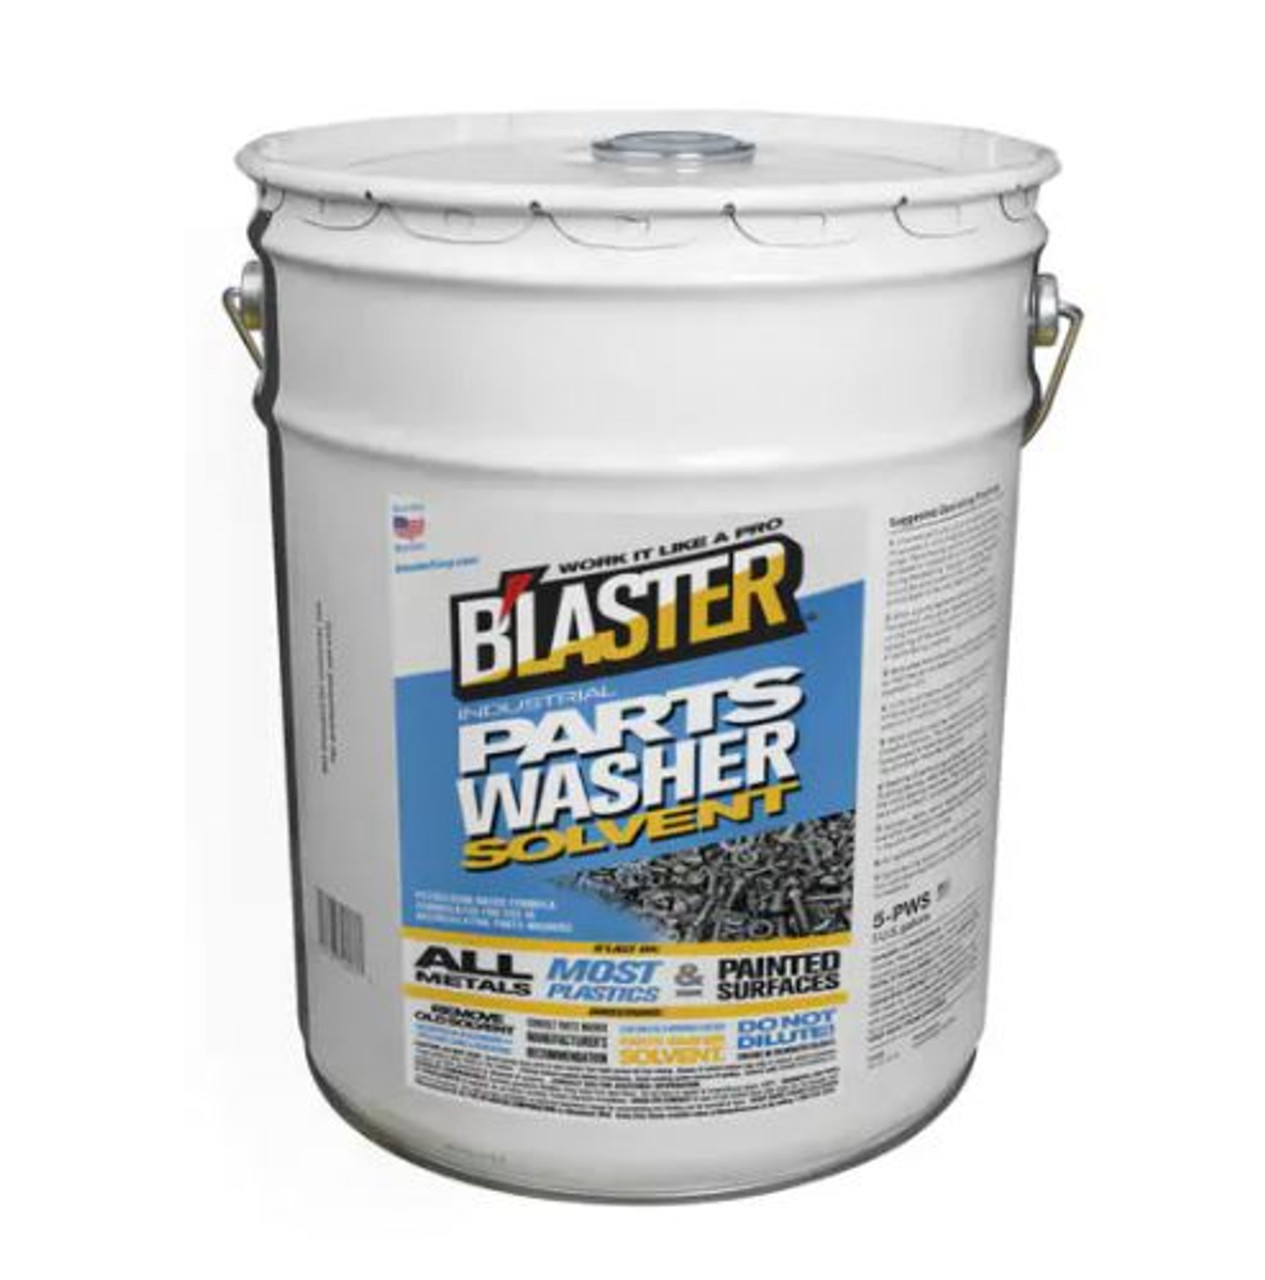 ENGINE DEGREASER - B'laster Products